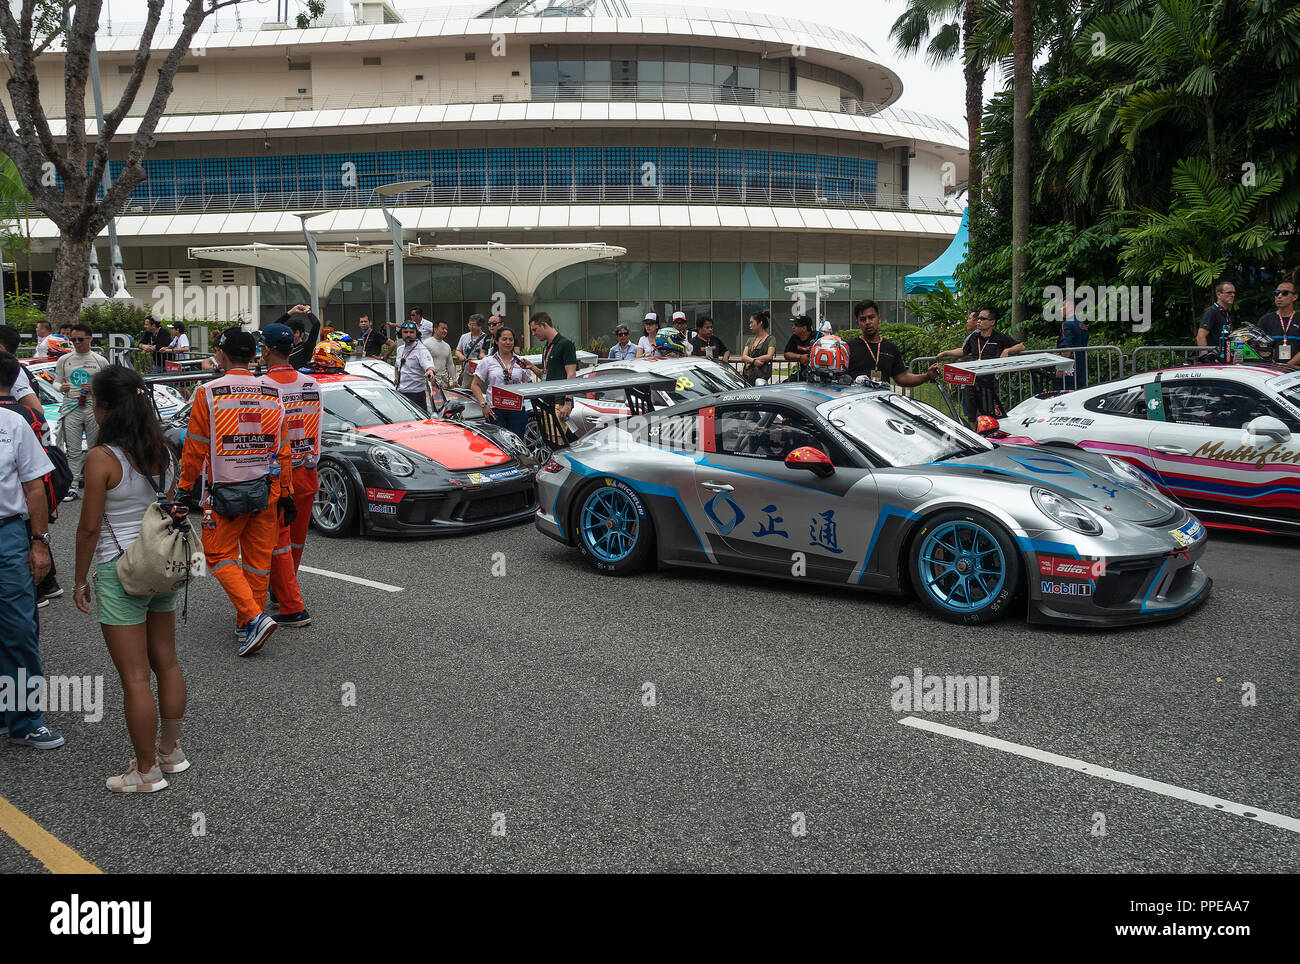 Porsche 911 GT3 Racing Cars Participating in the Porsche Carrera Cup Asia  at the Marina Bay Street Circuit Singapore Asia Stock Photo - Alamy